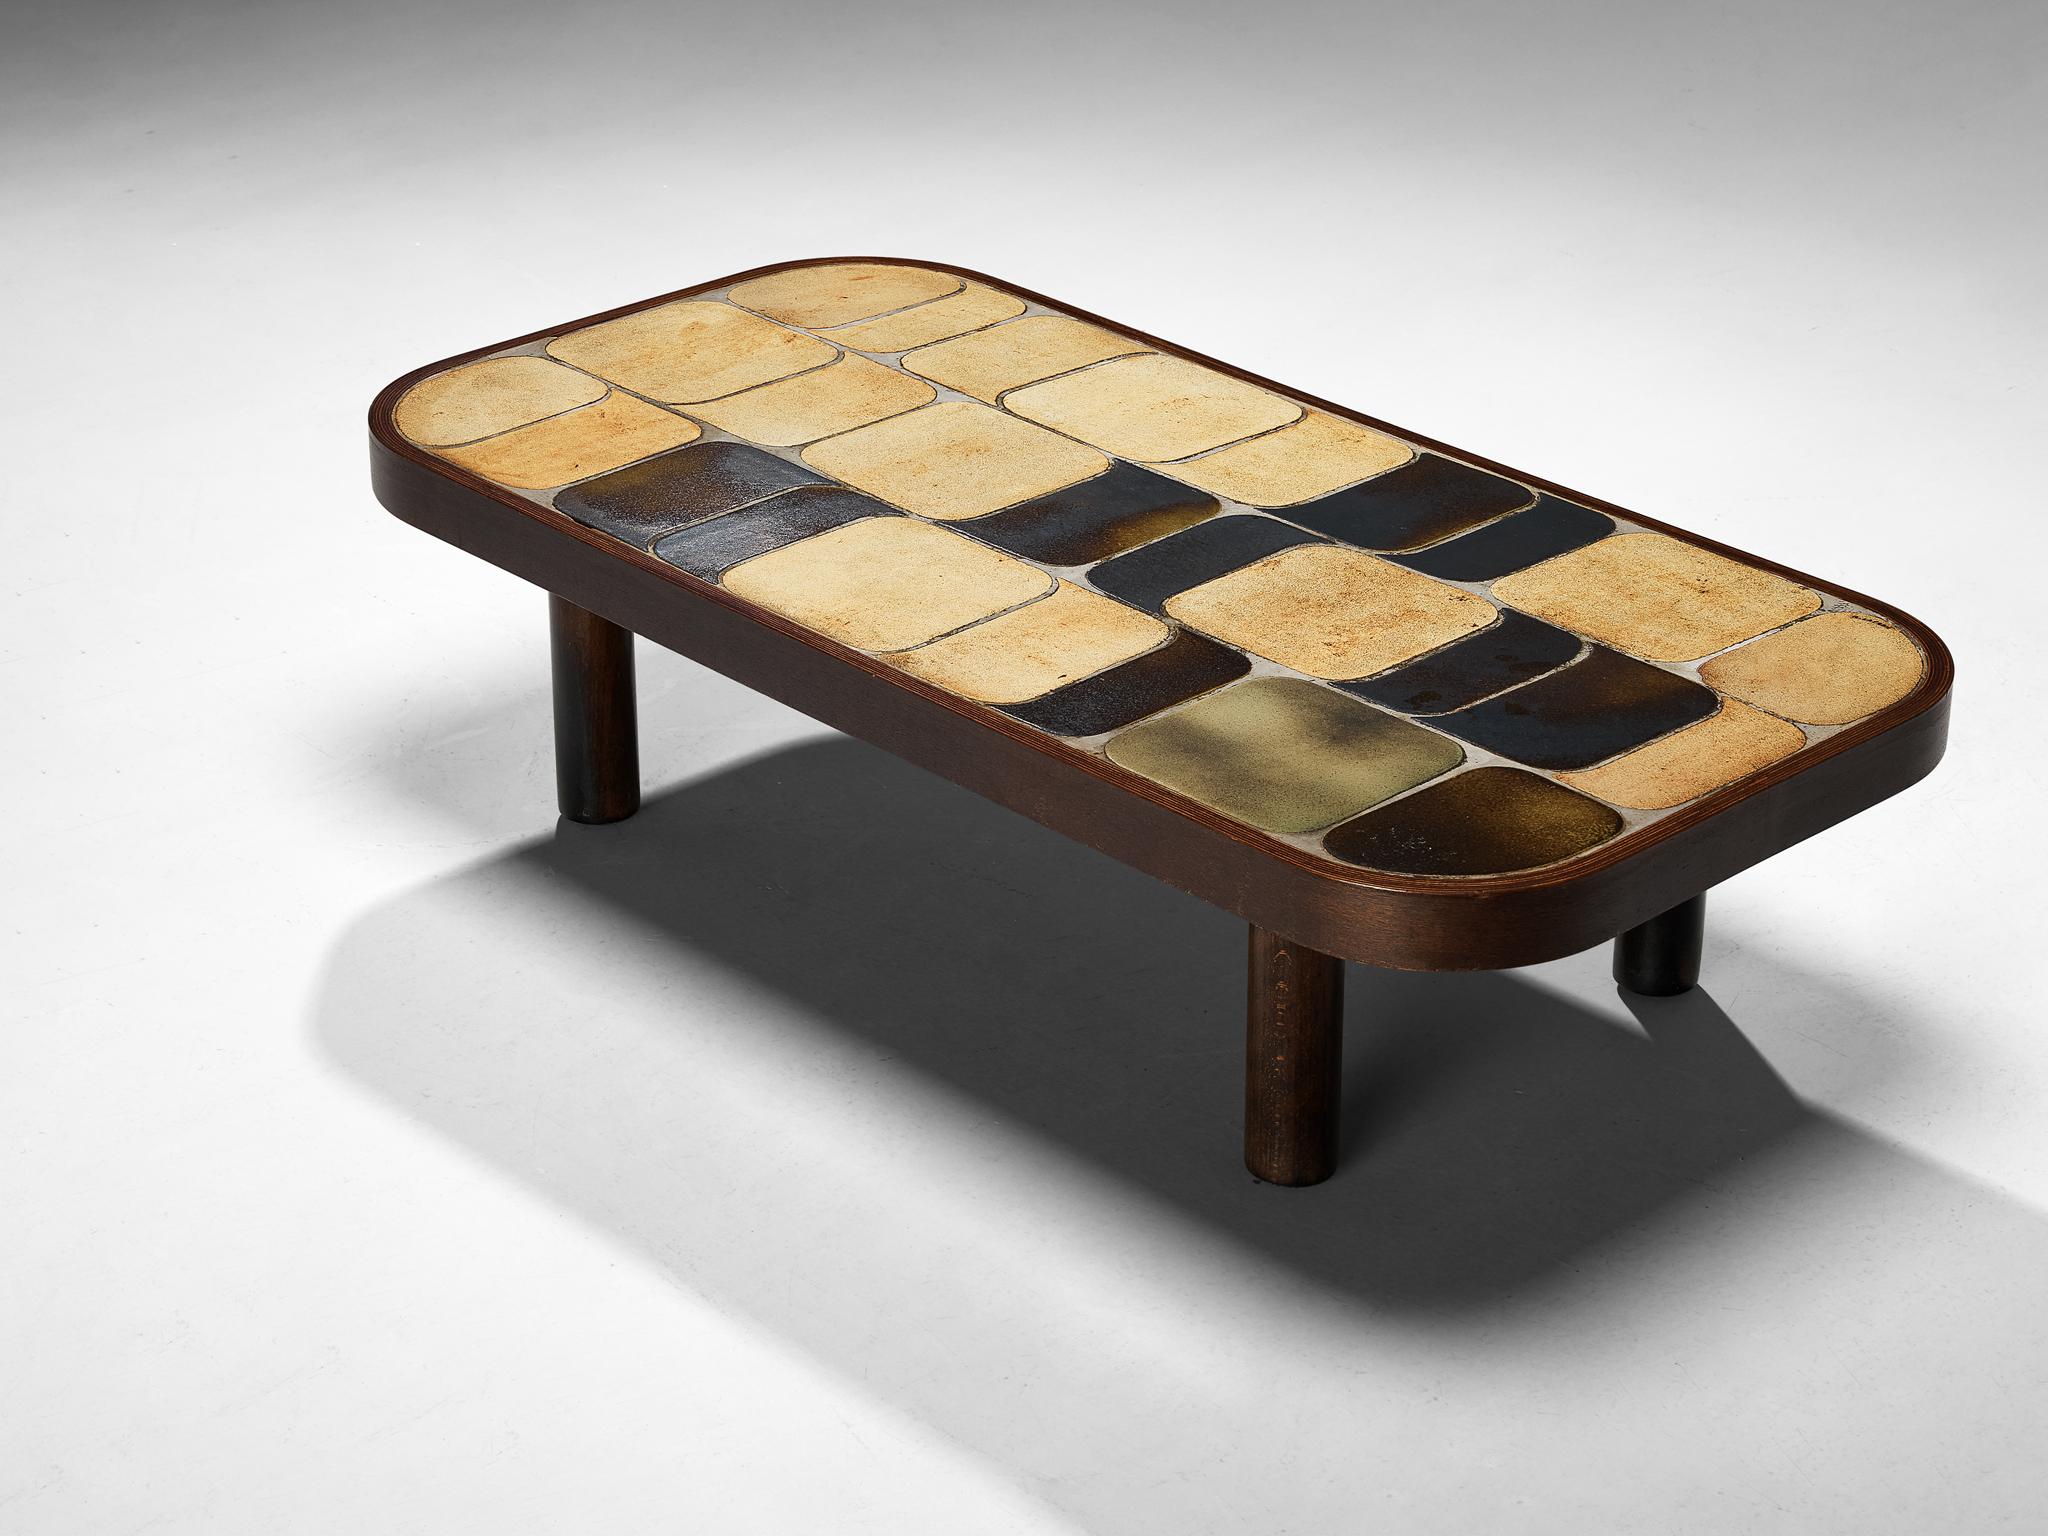 Roger Capron, coffee table, ceramic, stained beech, France, 1960s

Lovely French coffee table with wonderful composed ceramic tiles by French designer Roger Capron. Both the tiles as well as the frame feature rounded corners. The tiles have